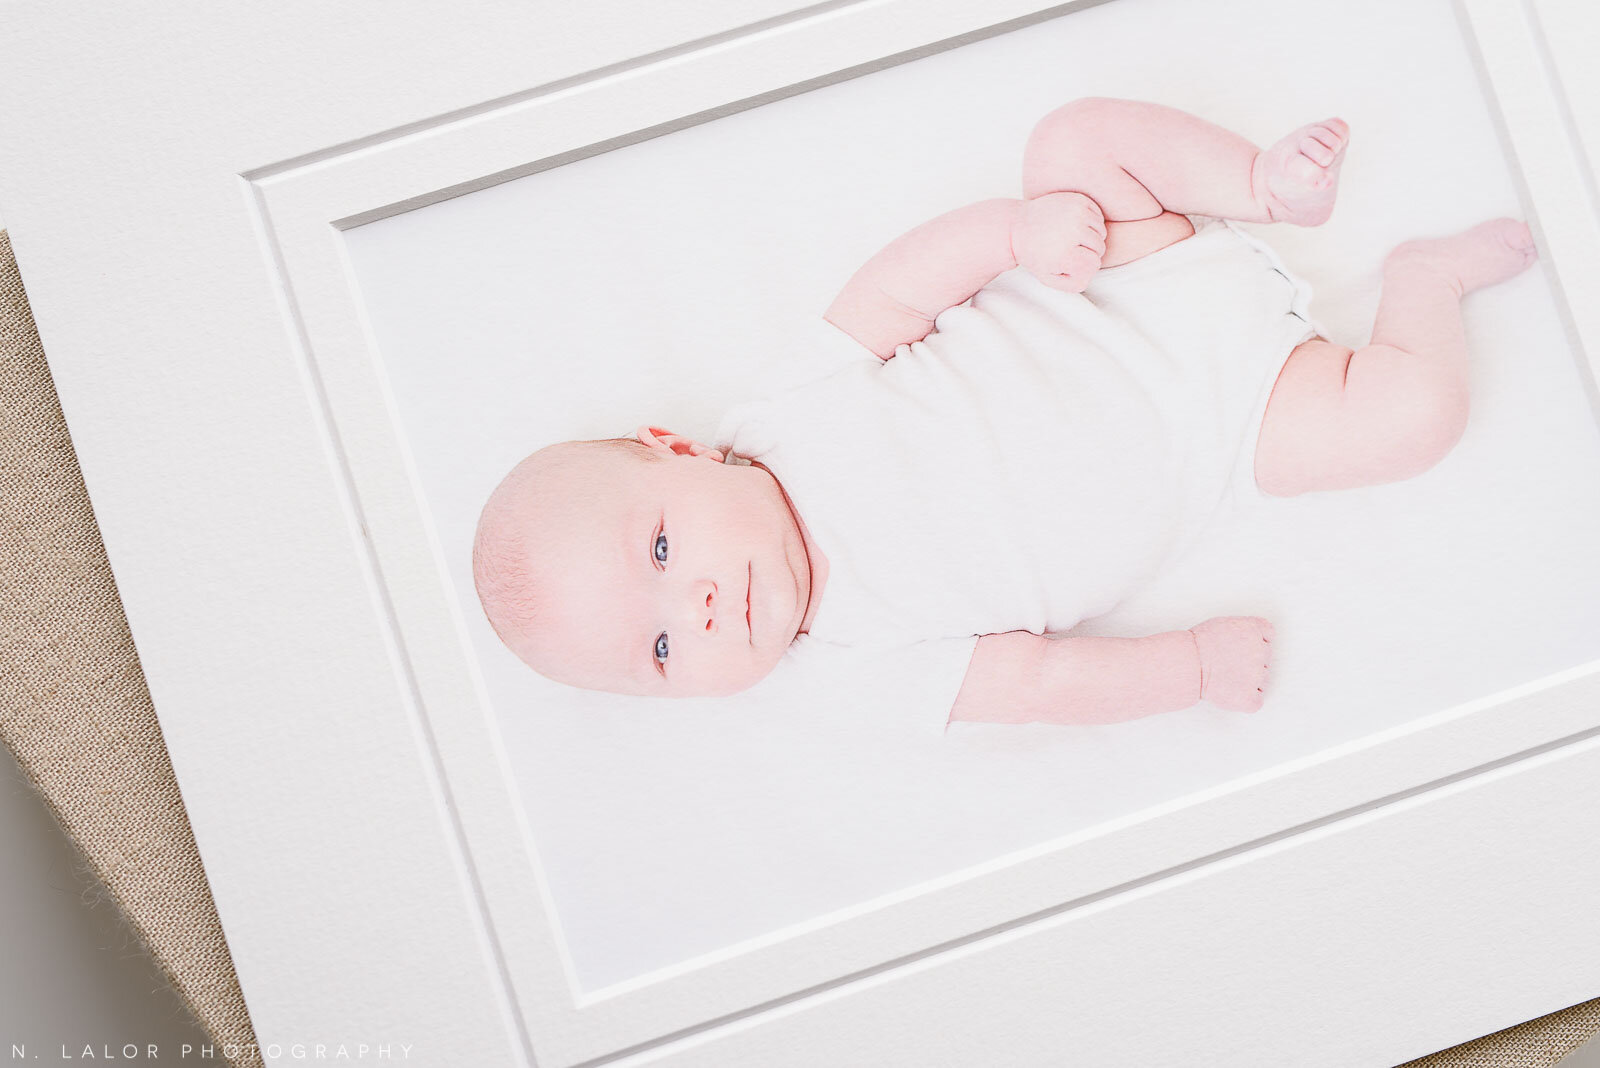 nlalor-photography-2018-twins-baby-photo-session-greenwich-connecticut-8.jpg